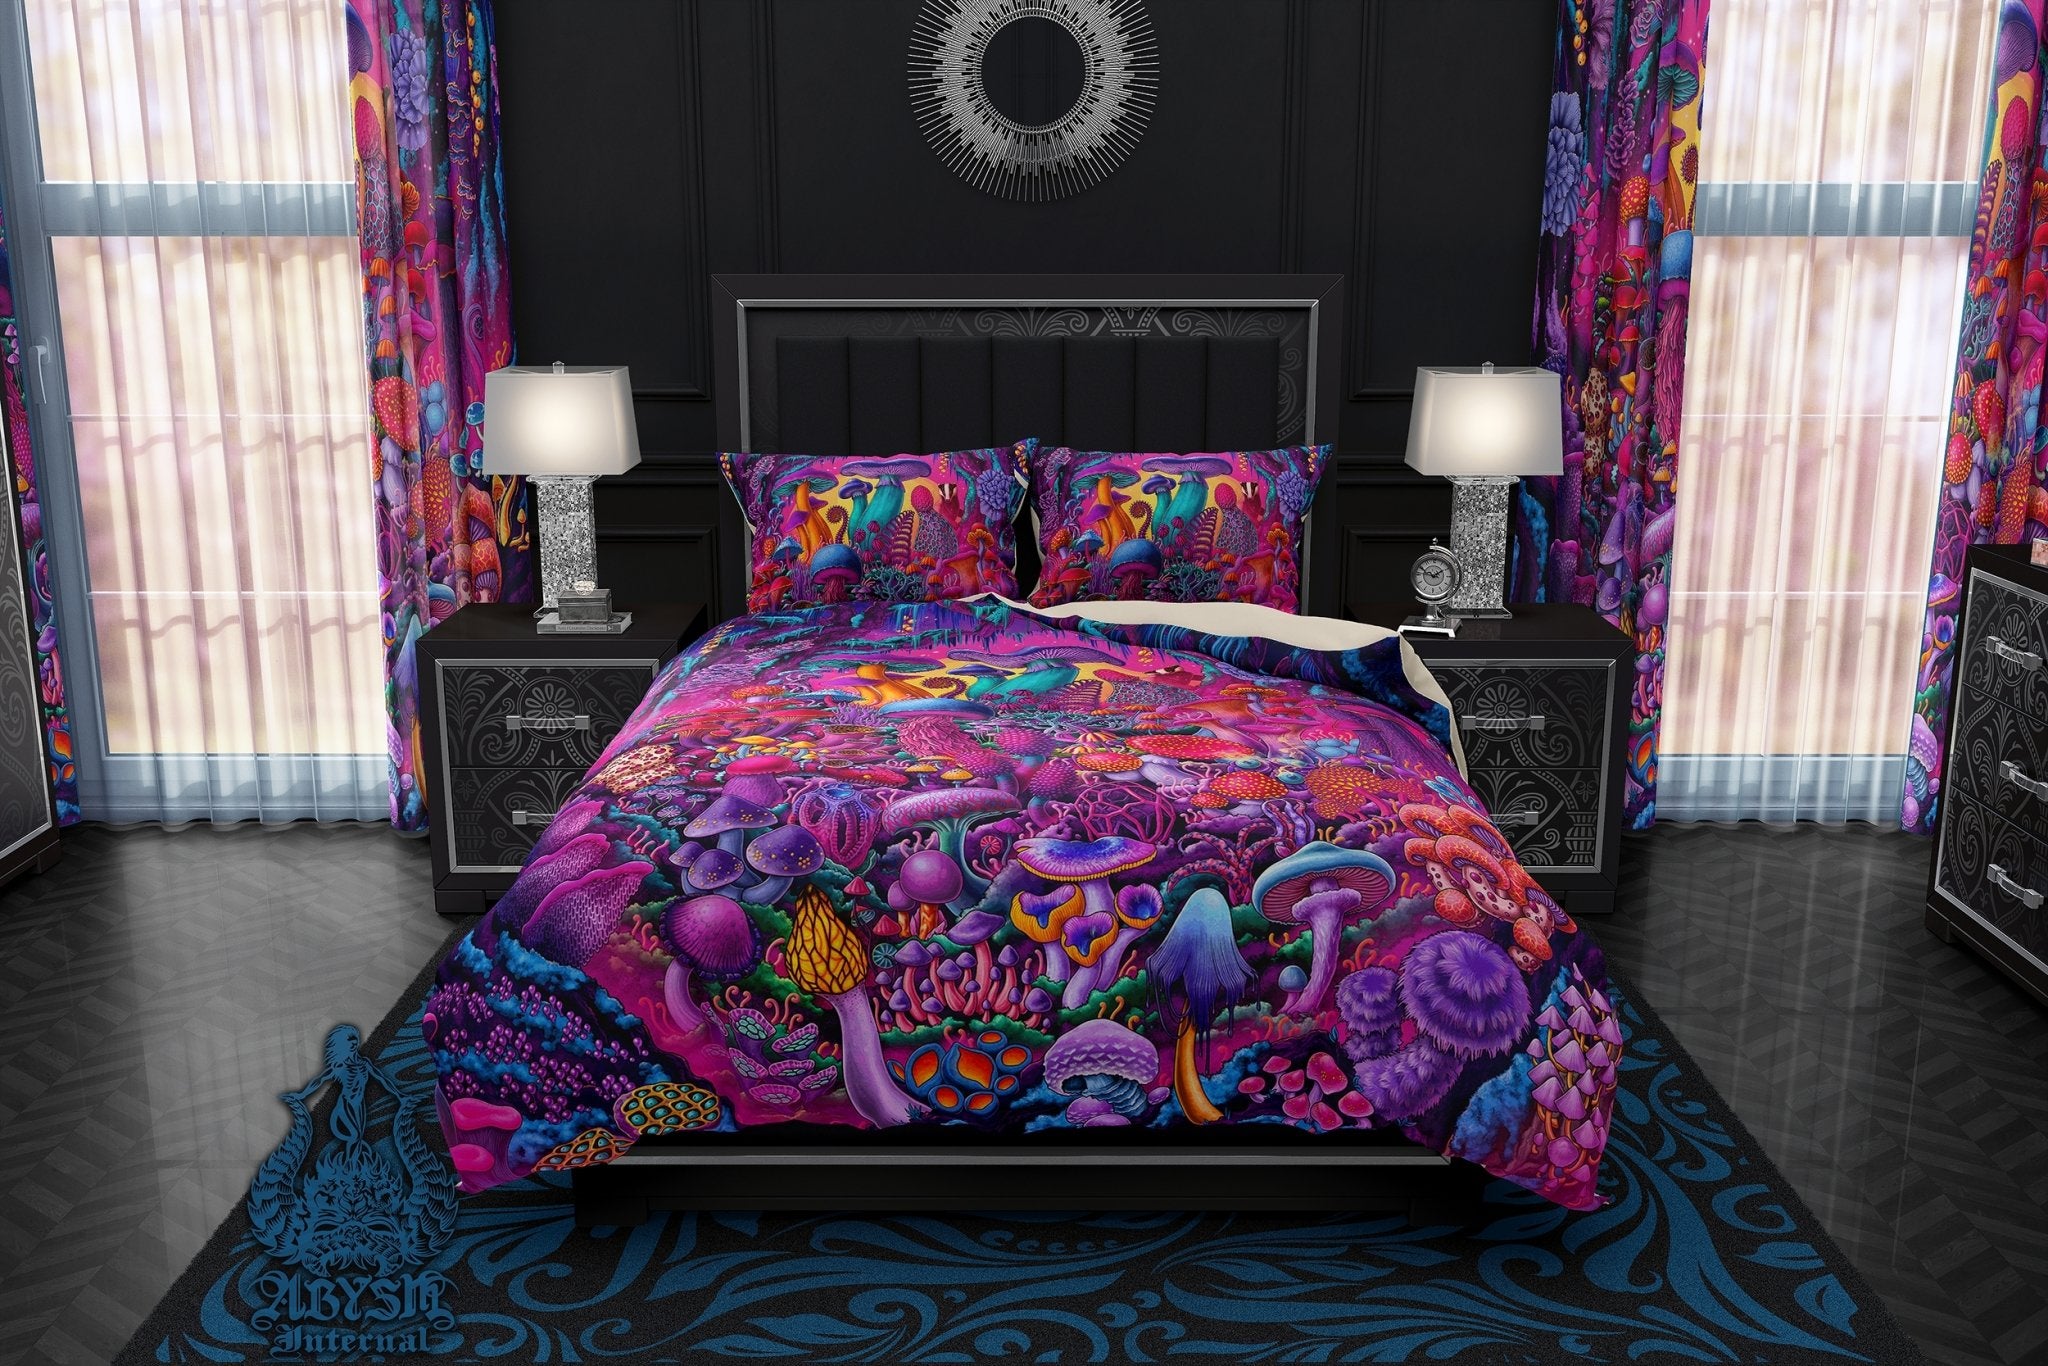 Magic Mushrooms Bedding Set, Comforter and Duvet, Psychedelic Vaporwave Bed Cover and Retrowave Bedroom Decor, King, Queen and Twin Size, Gamer 80s Room - Synthwave - Abysm Internal